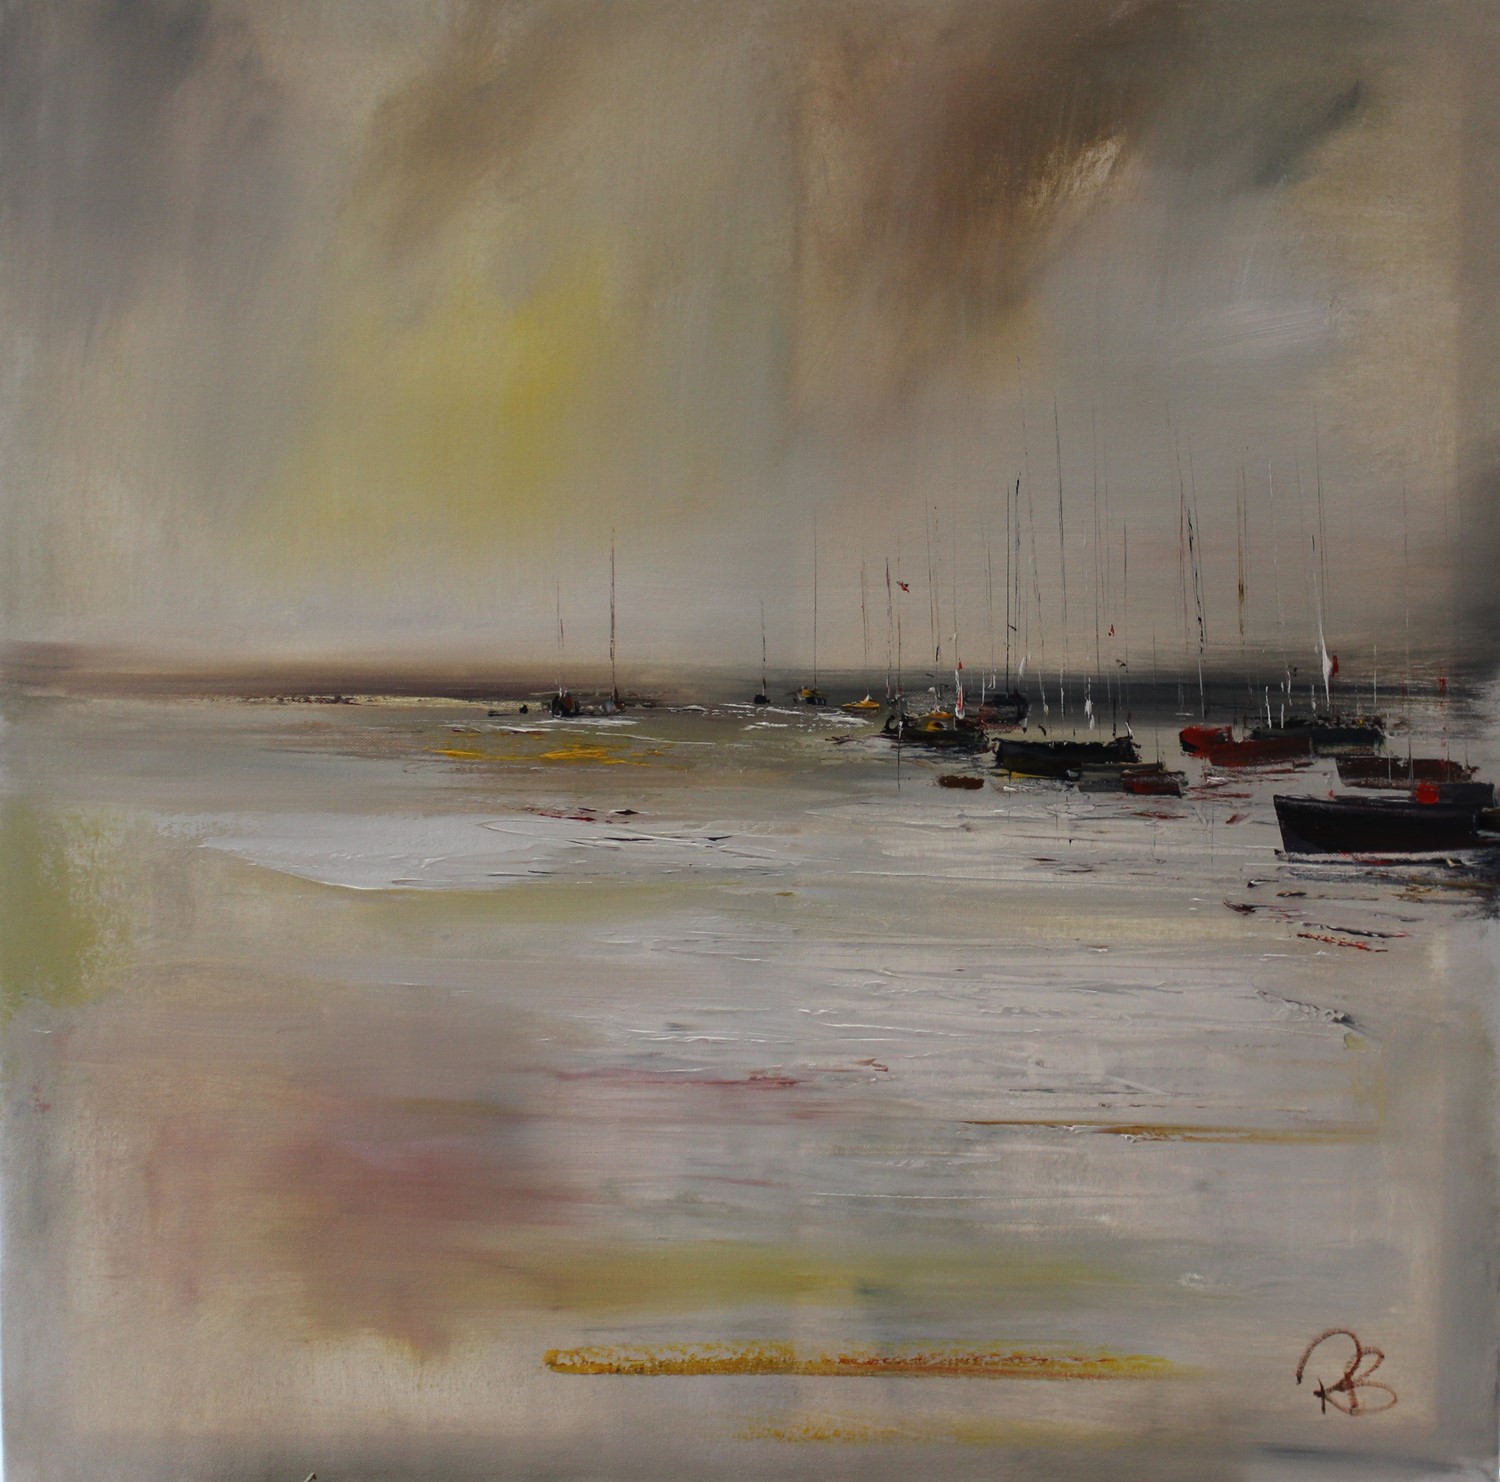 'Mist Hanging over the Harbour' by artist Rosanne Barr